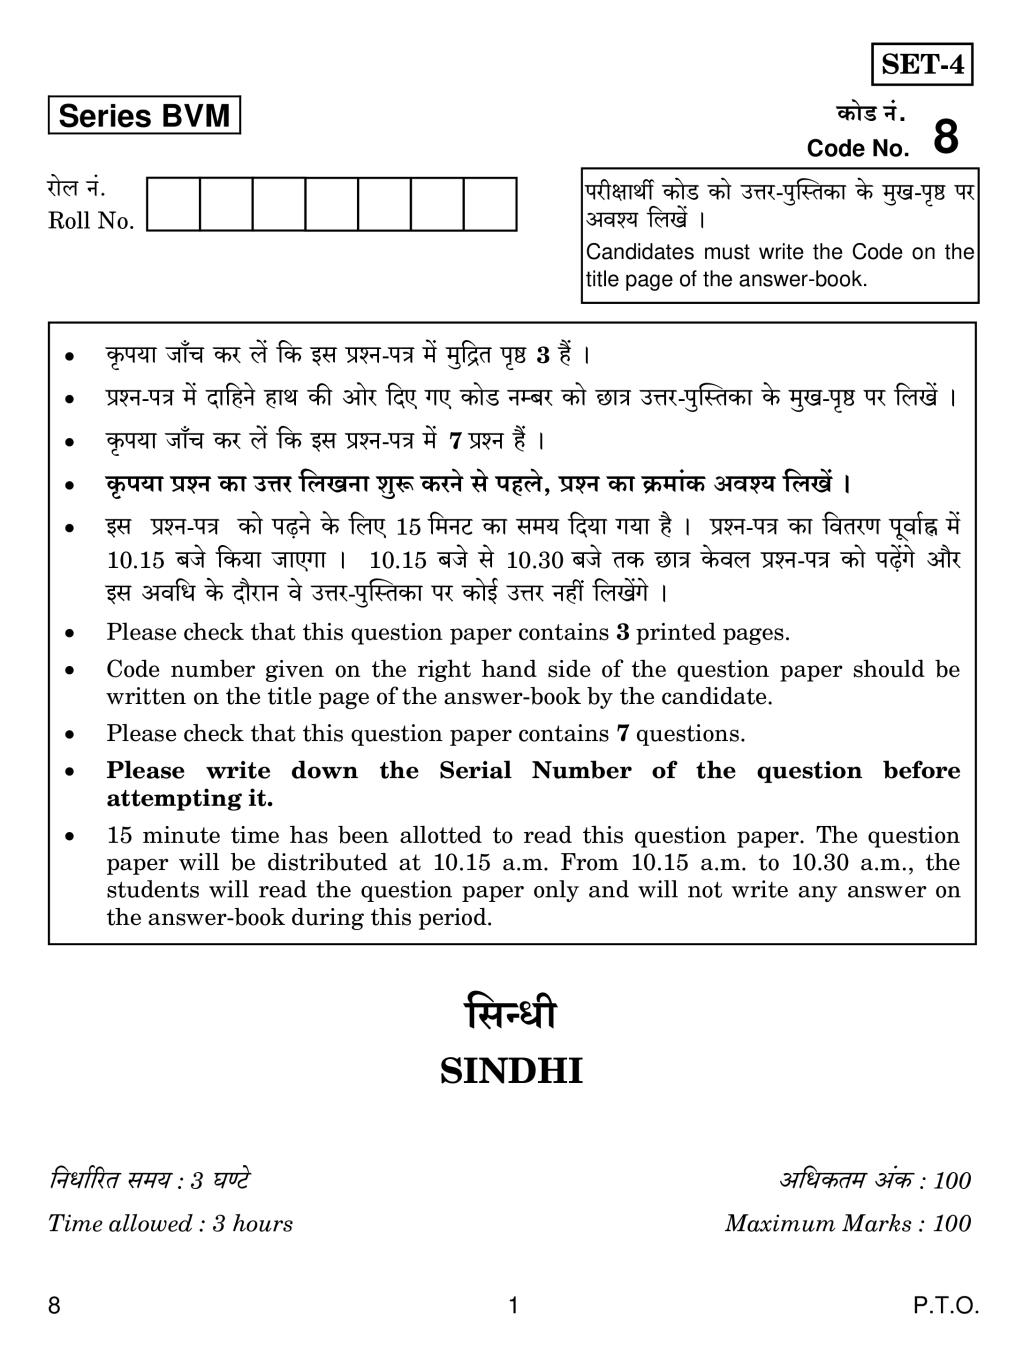 CBSE Class 12 Sindhi Question Paper 2019 - Page 1